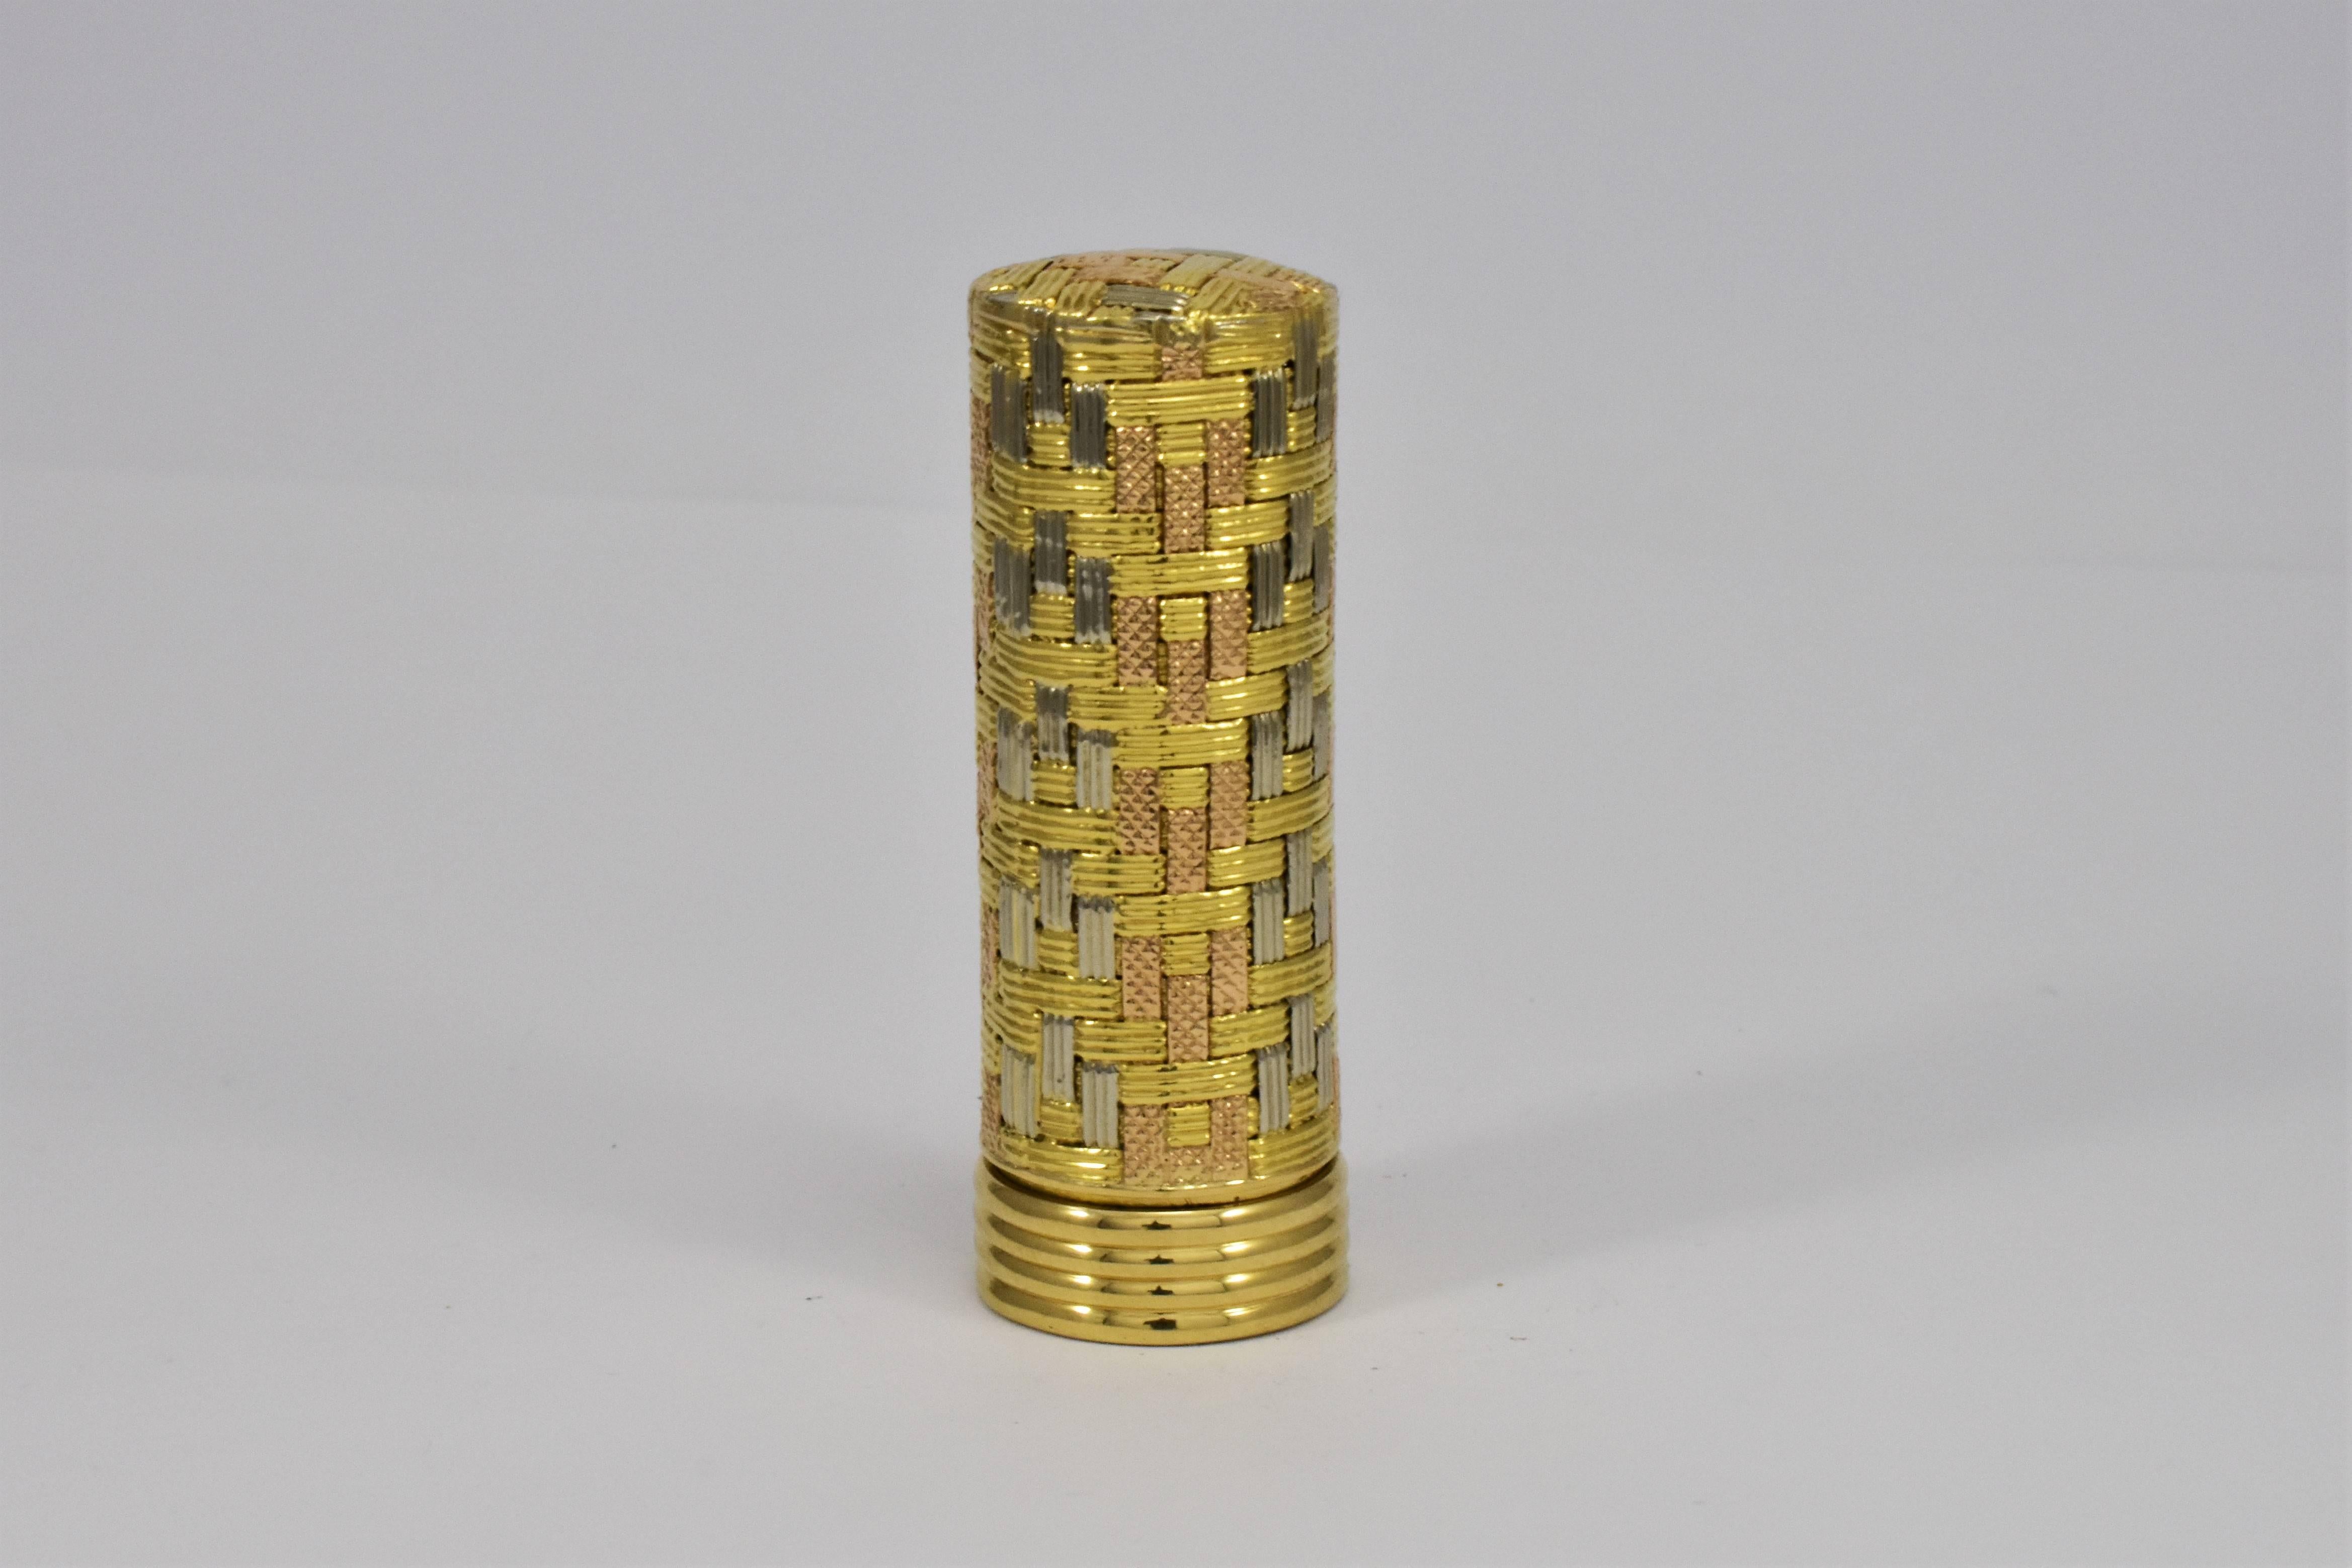 A lipstick cover with a woven detail design combining three colors of yellow, white and rose gold. A chic women's accessory of the 1960s. This small gold container could be re-purposed as a pill box or other precious keepsake box. Made in Italy.